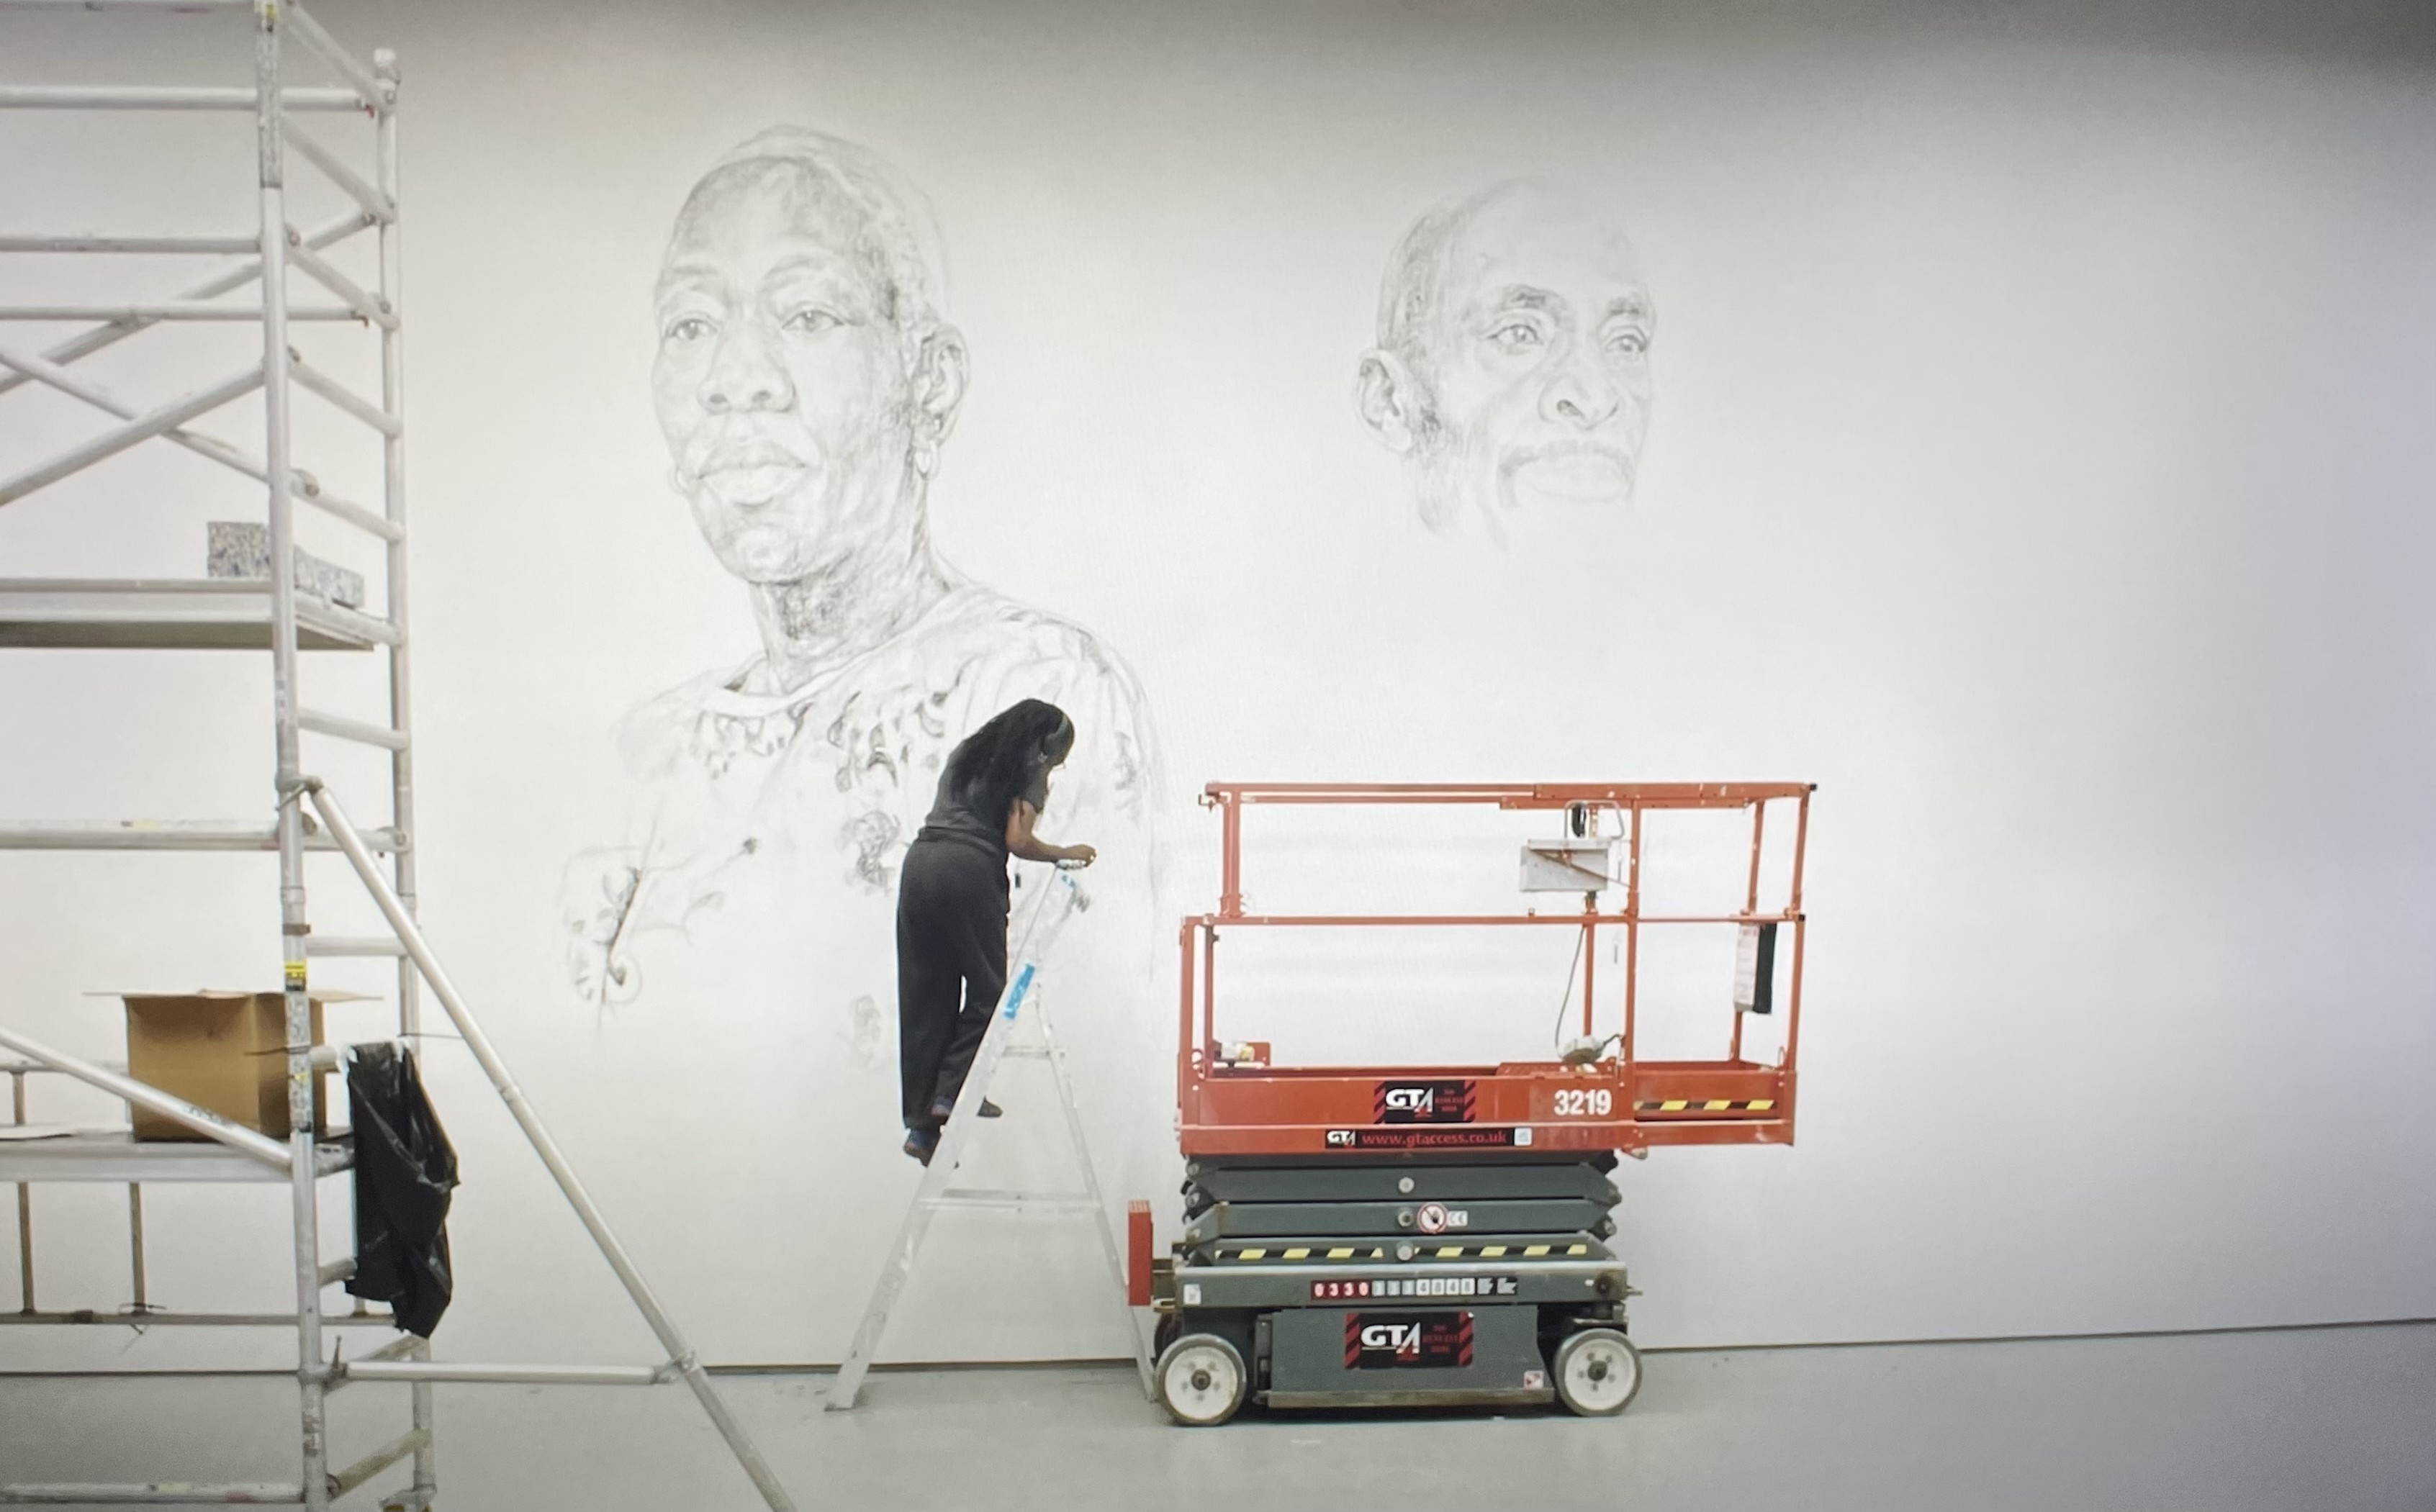 Still from an introduction video showing the artist creating the work. “These drawings will be washed away by the artist at the end of the exhibition […]”